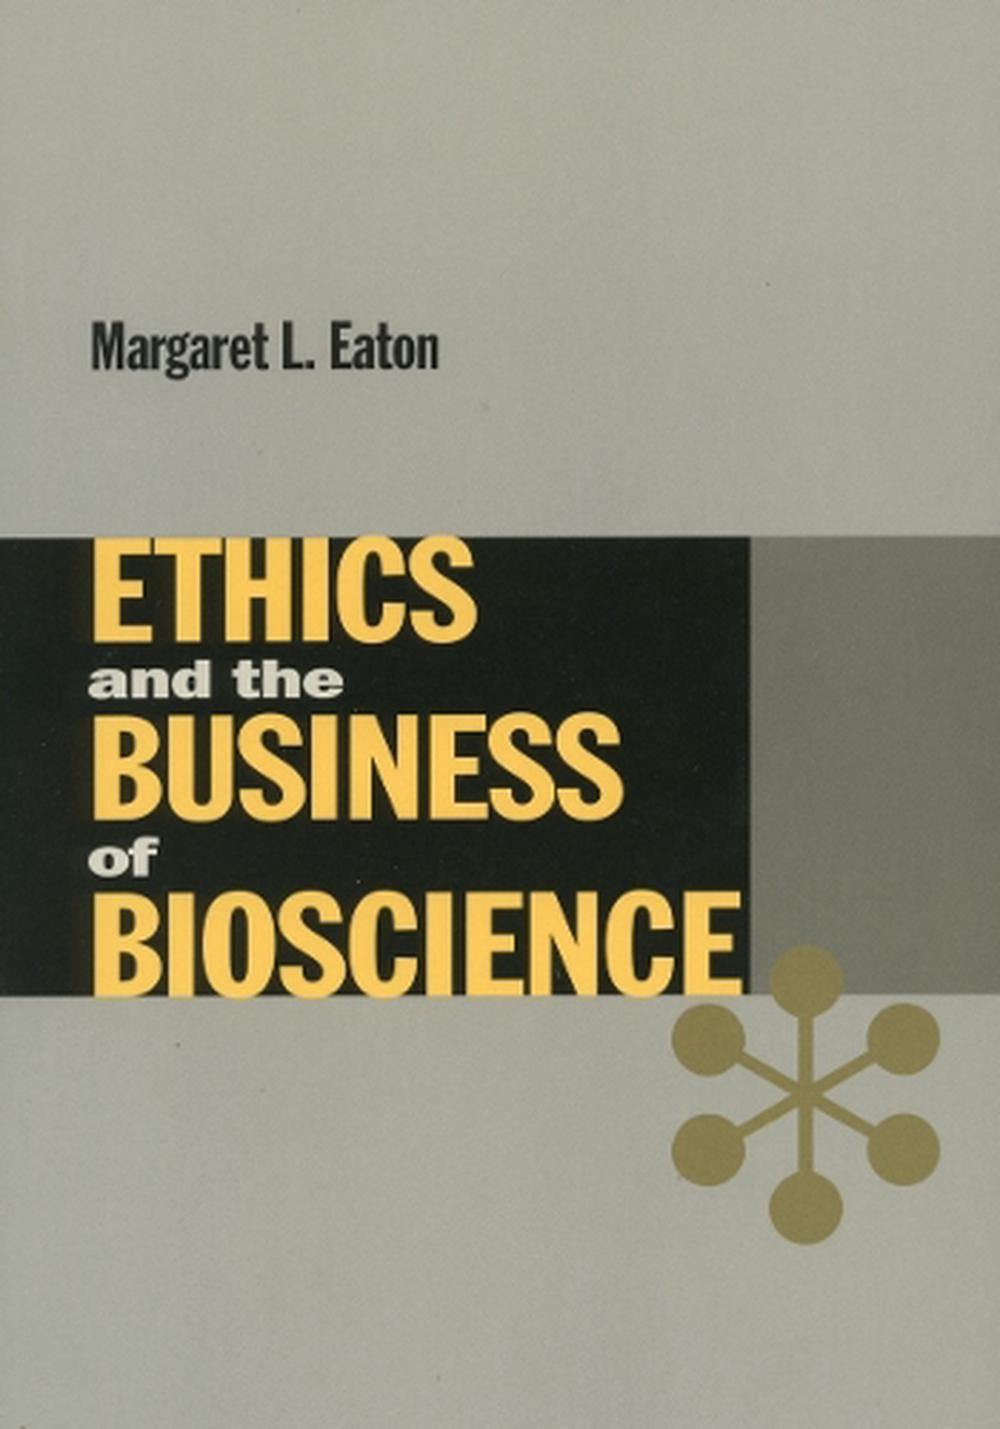 Ethics and the Business of Bioscience by Margaret L. Eaton (English